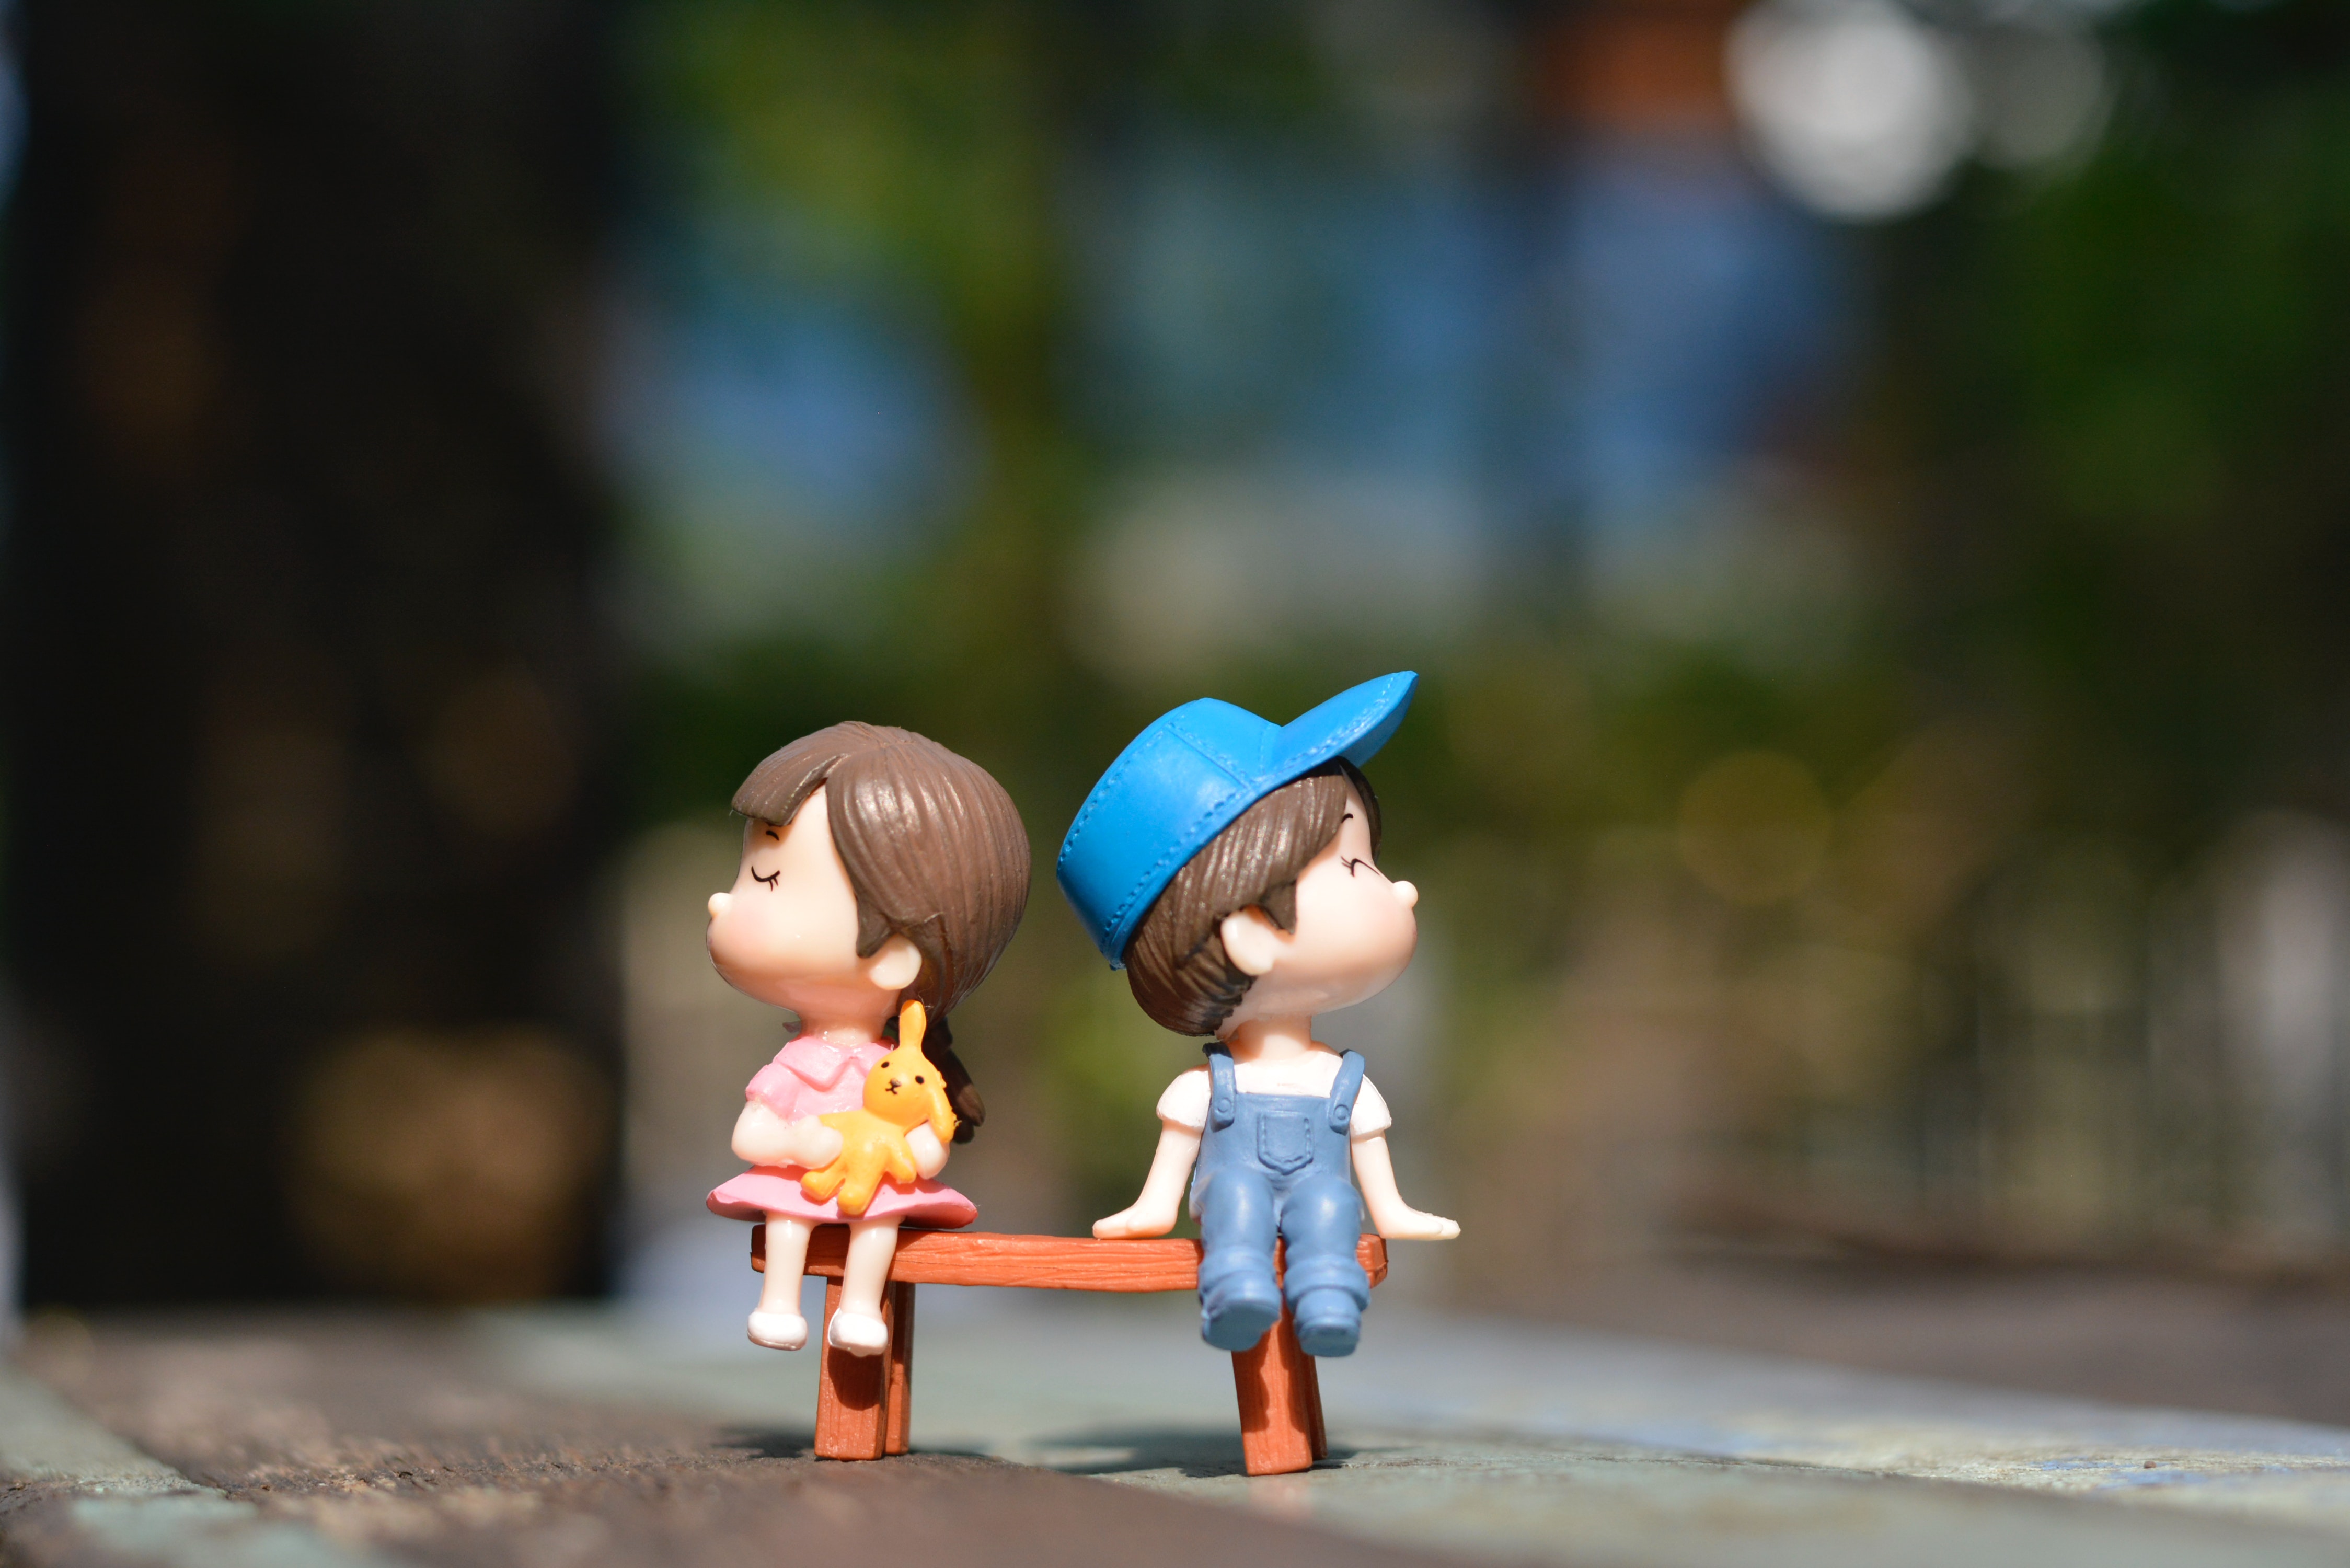 photo by j u n e: https://www.pexels.com/photo/boy-and-girl-sitting-on-bench-toy-1767434/